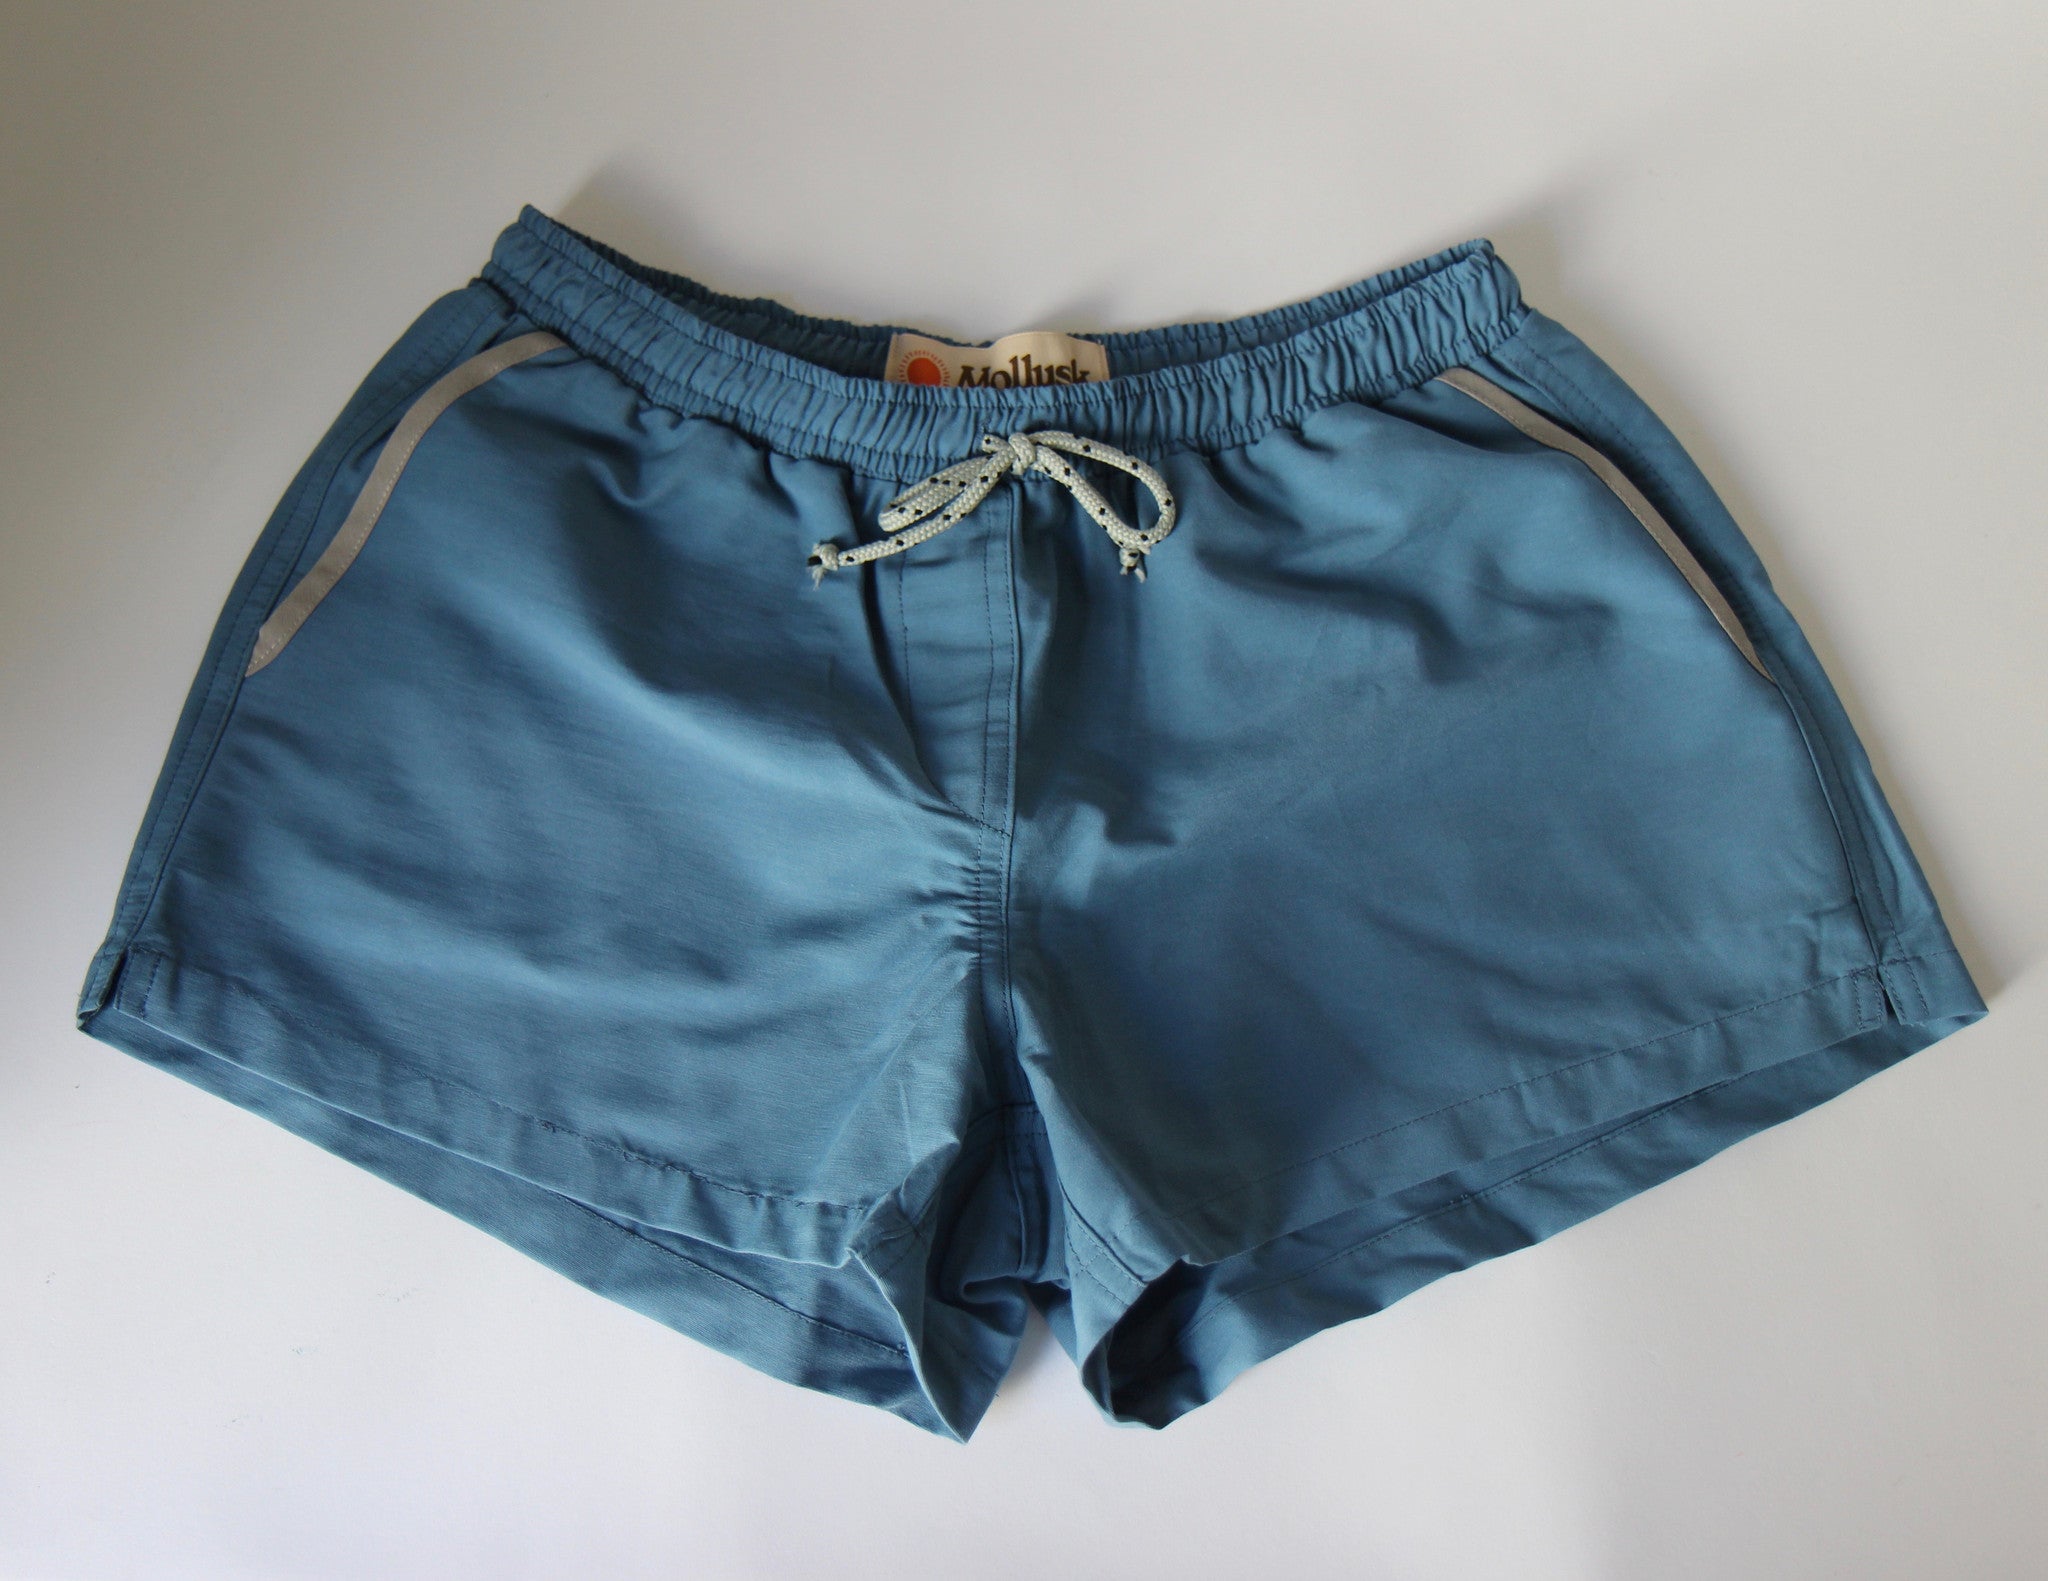 Mollusk Nippon Blue Tomboy Trunks – The Reed